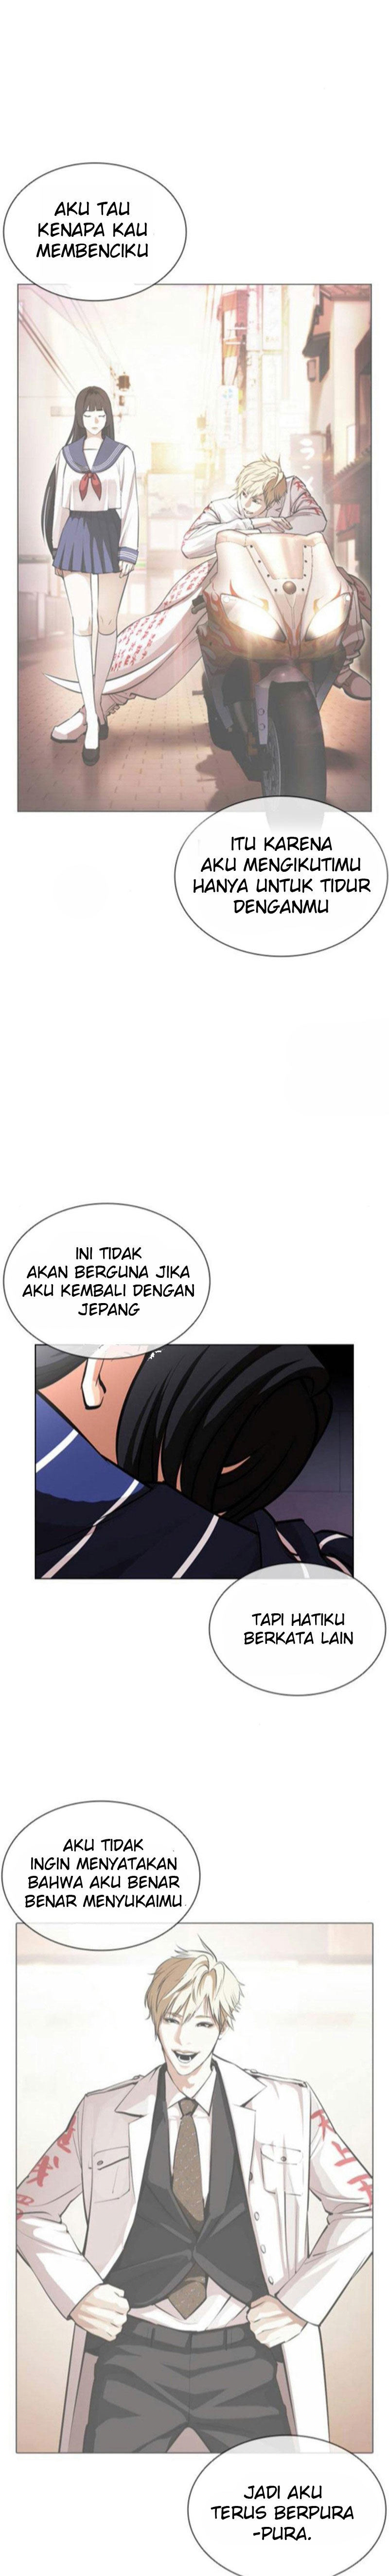 Lookism Chapter 394 Image 22